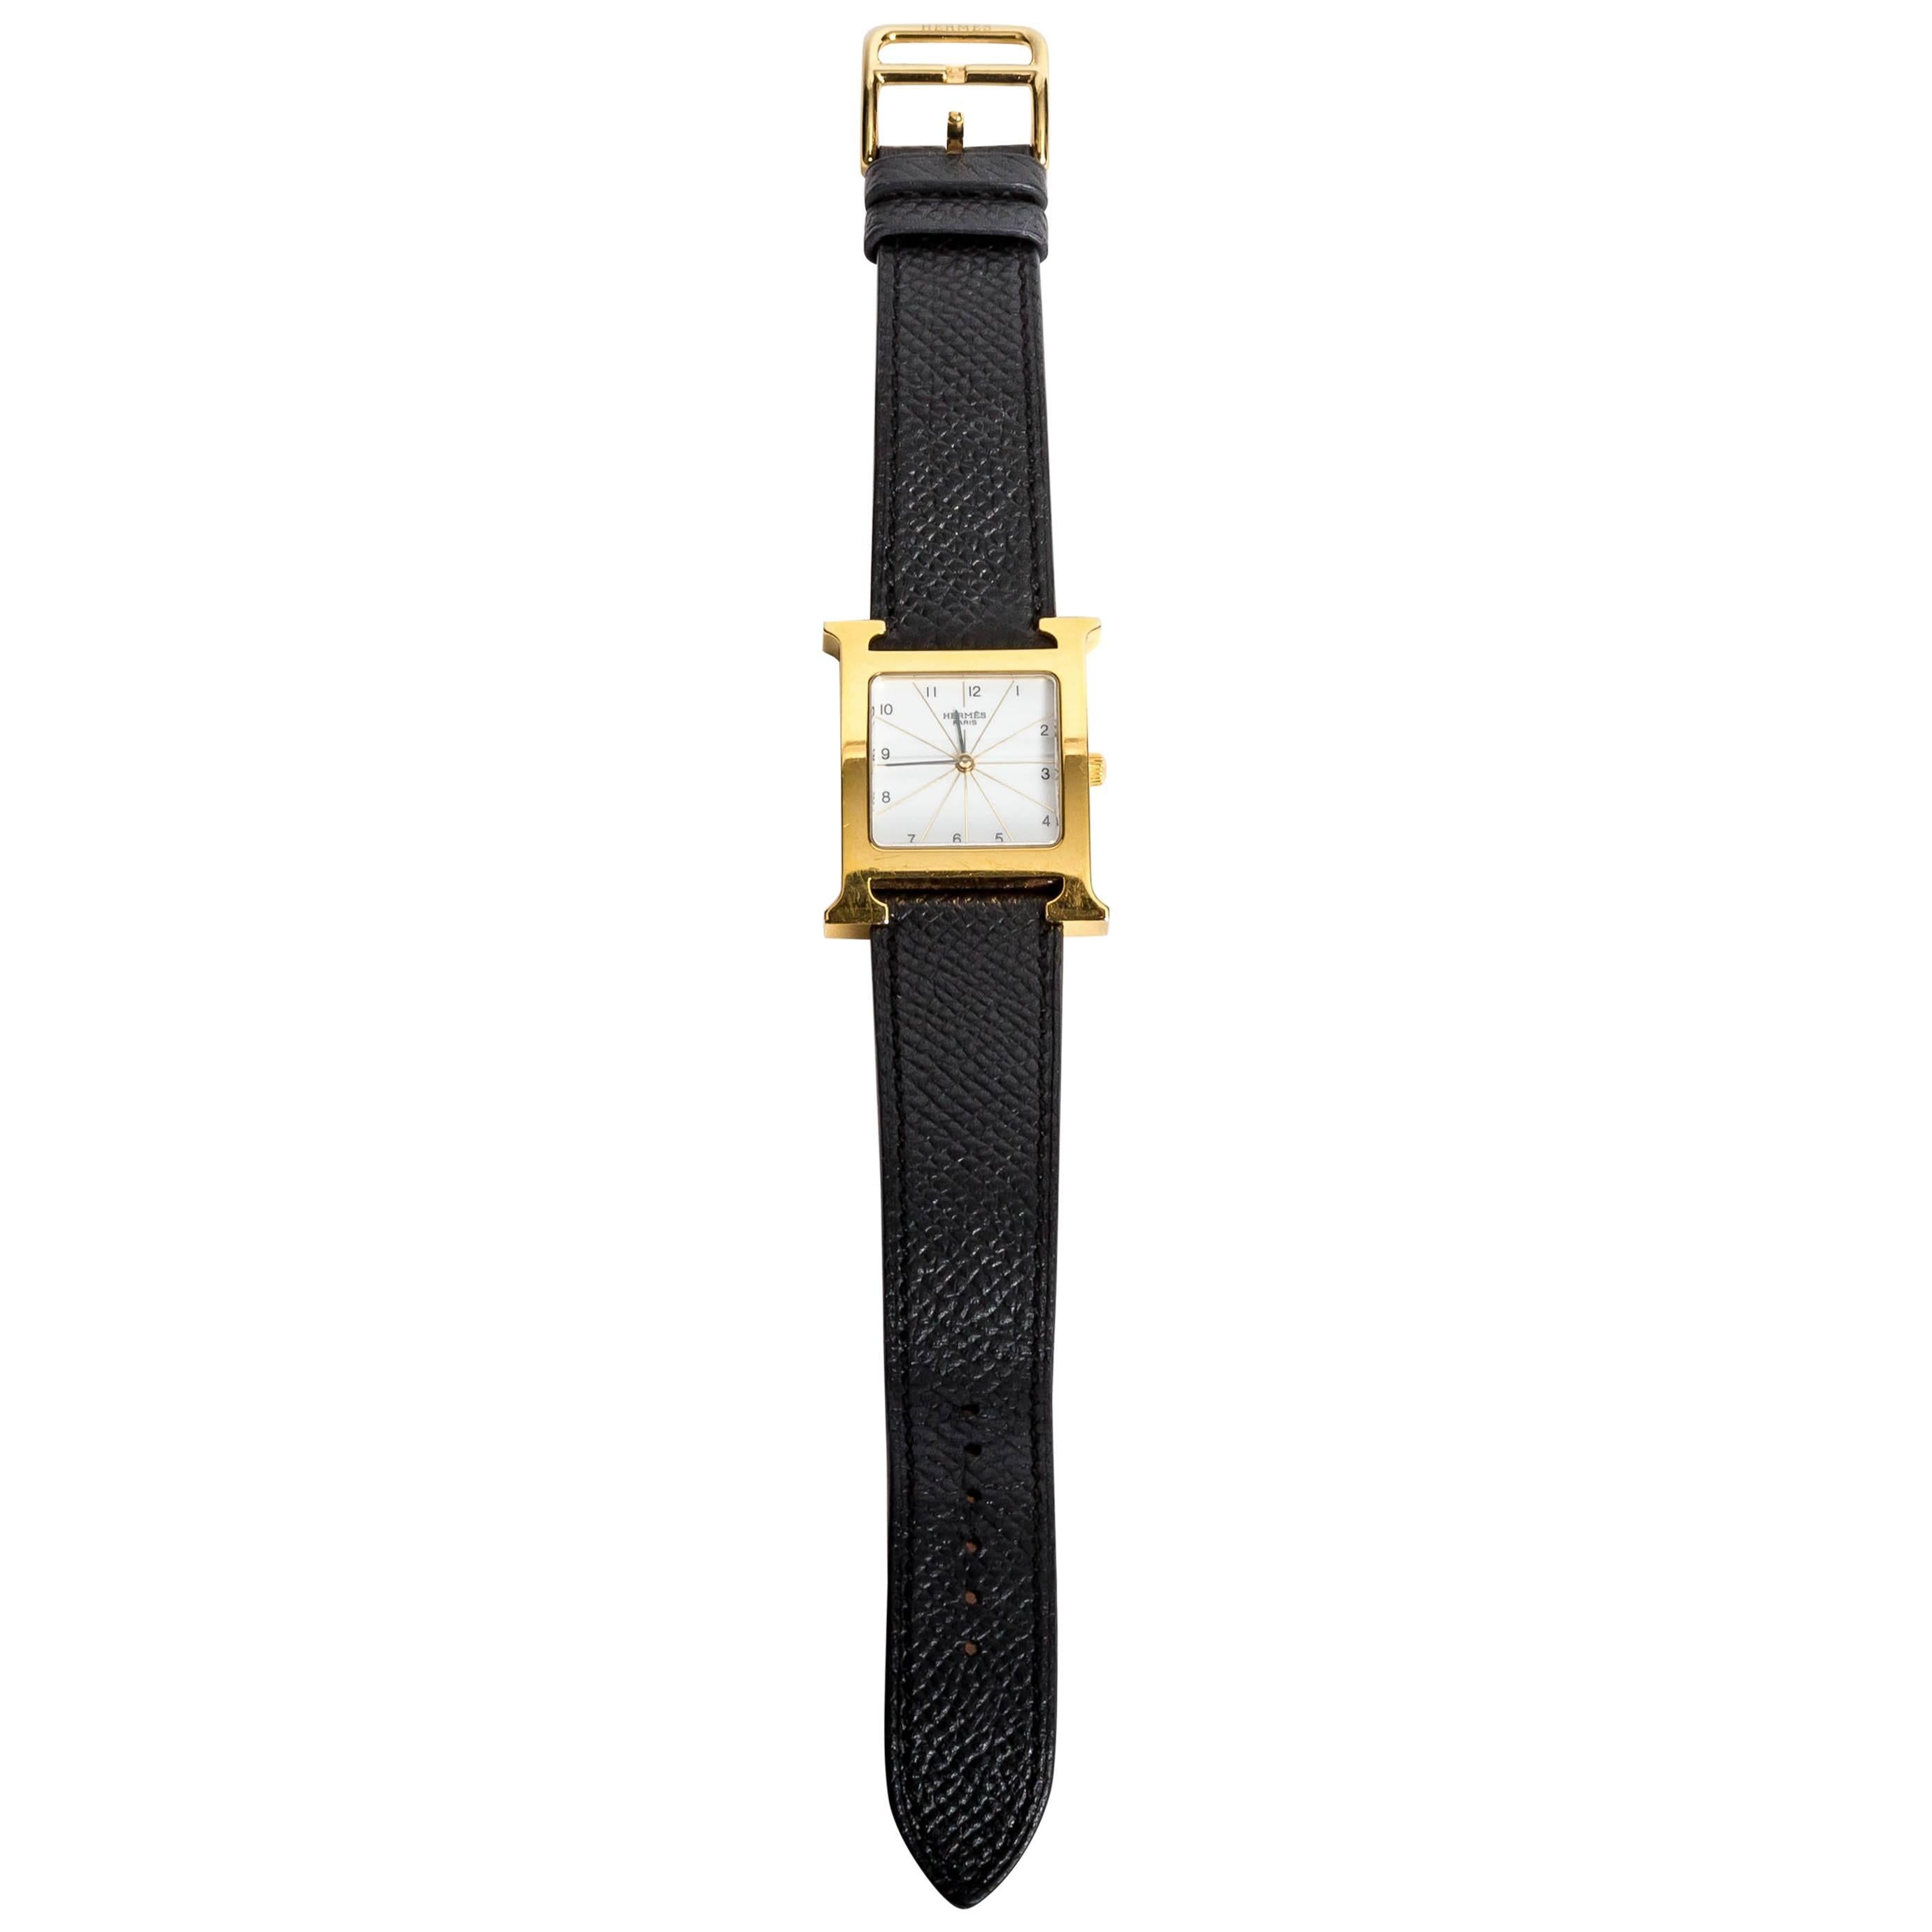 Hermes Heure H Watch in Goldtone Stainless Steel on a Grained Leather Strap